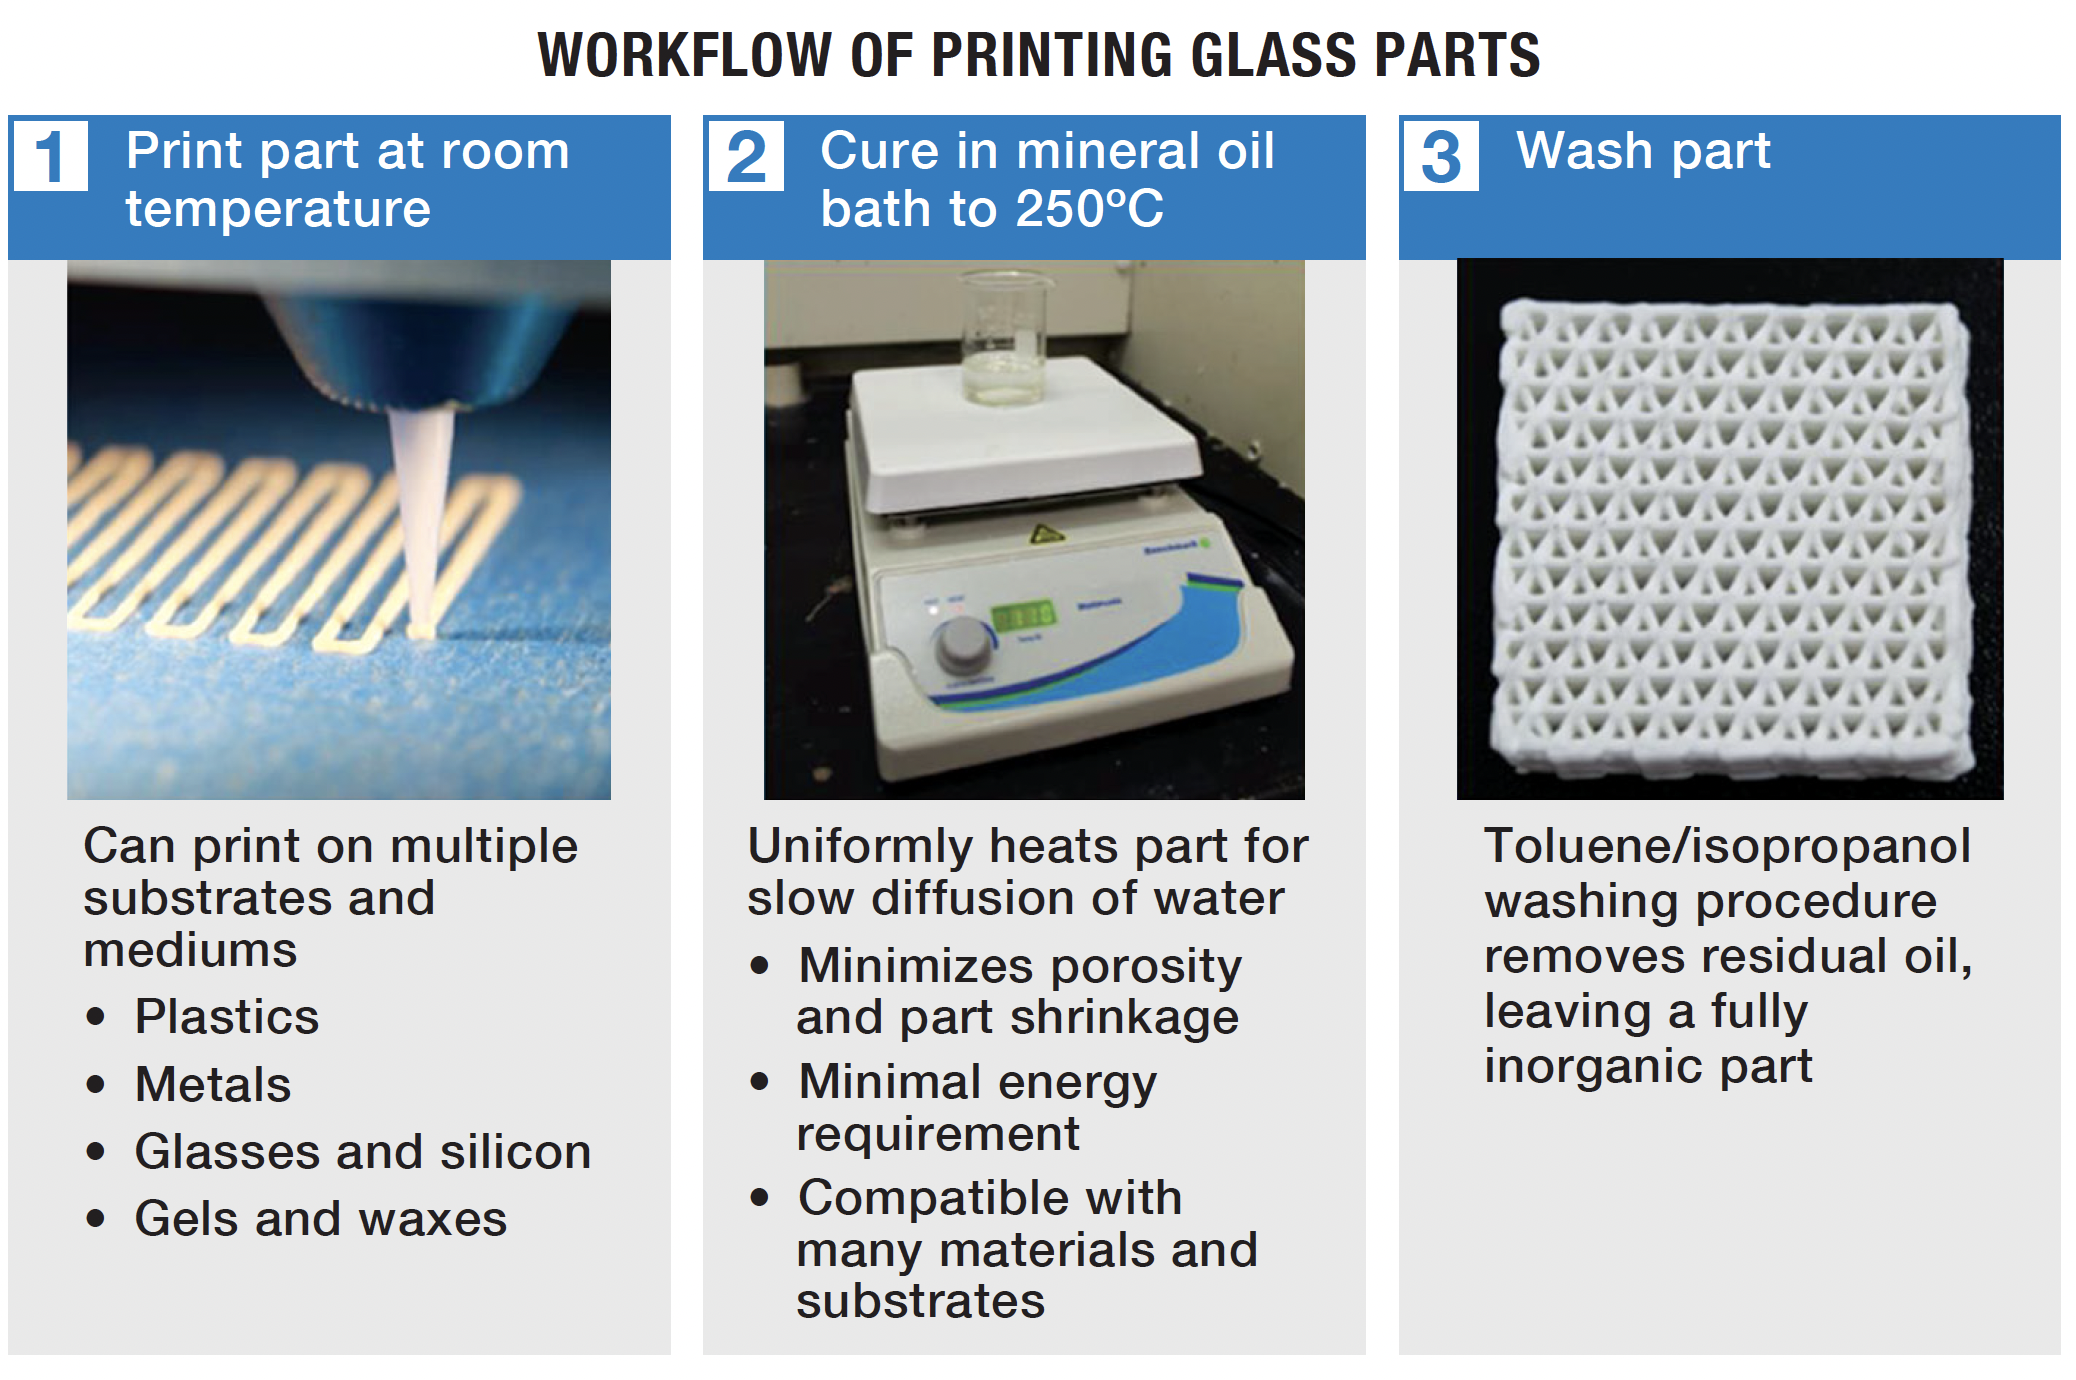 Workflow of printing glass parts: 1) Print part at room temperature, 2) Cure in mineral oil bath to 250C, 3) Wash part